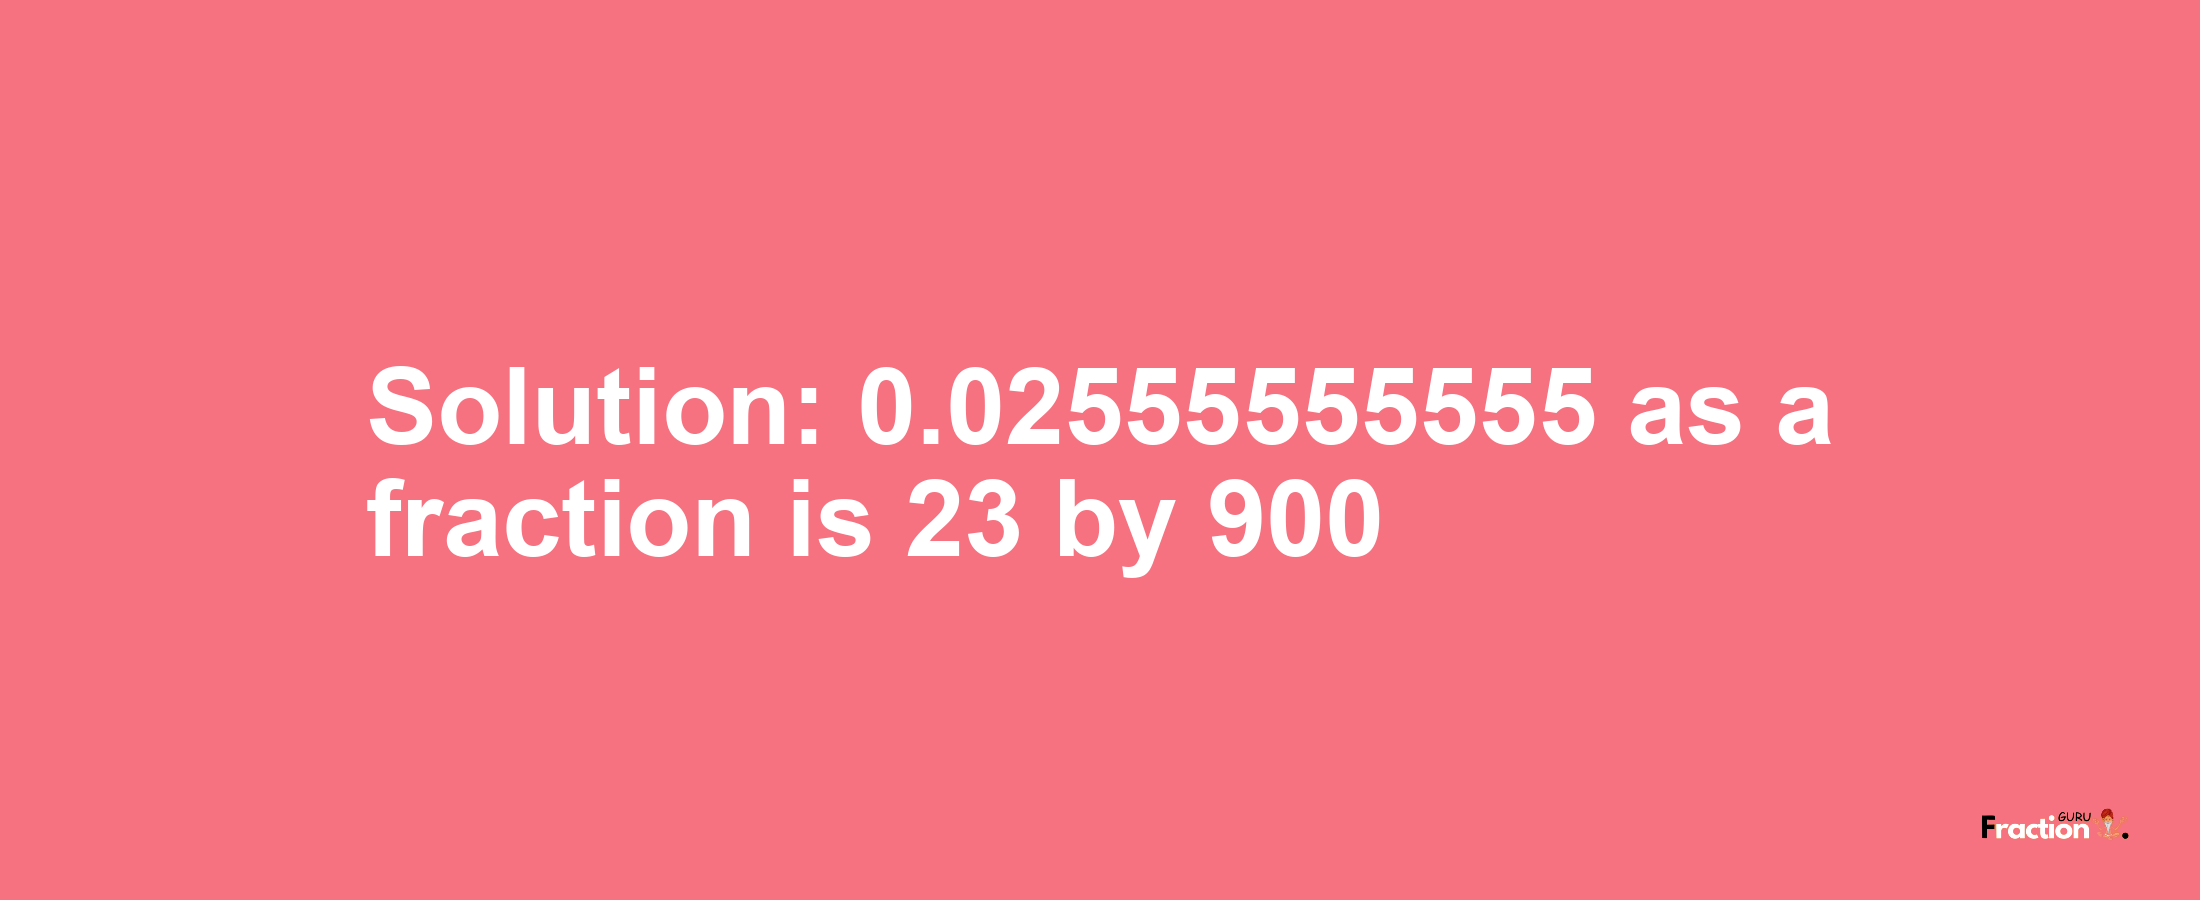 Solution:0.02555555555 as a fraction is 23/900